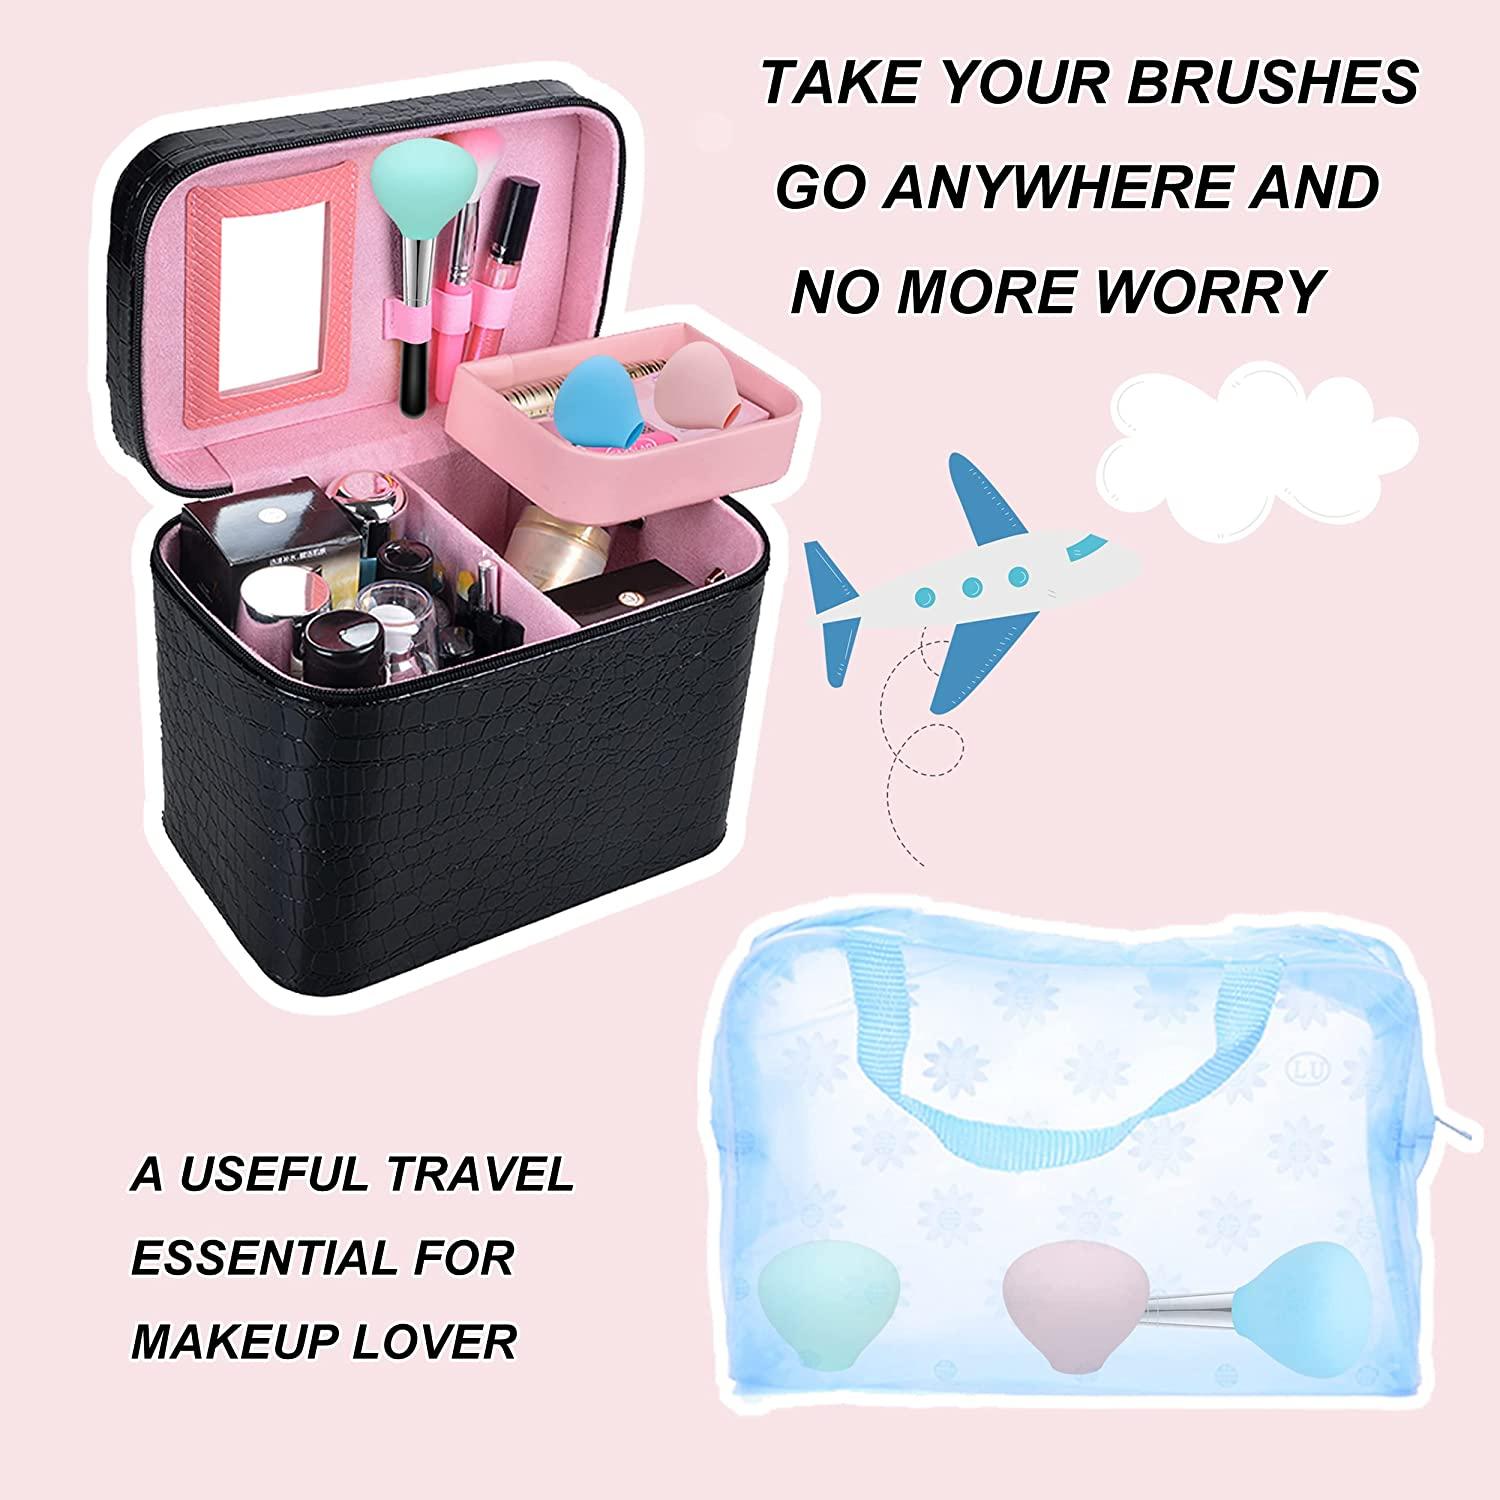 Makeup Brush Pouch Silicone Storage Case Protector Dustproof Makeup Cosmetic Bag Reusable Makeup Brush Holder Gifts for Make Up Wife Women A, Size